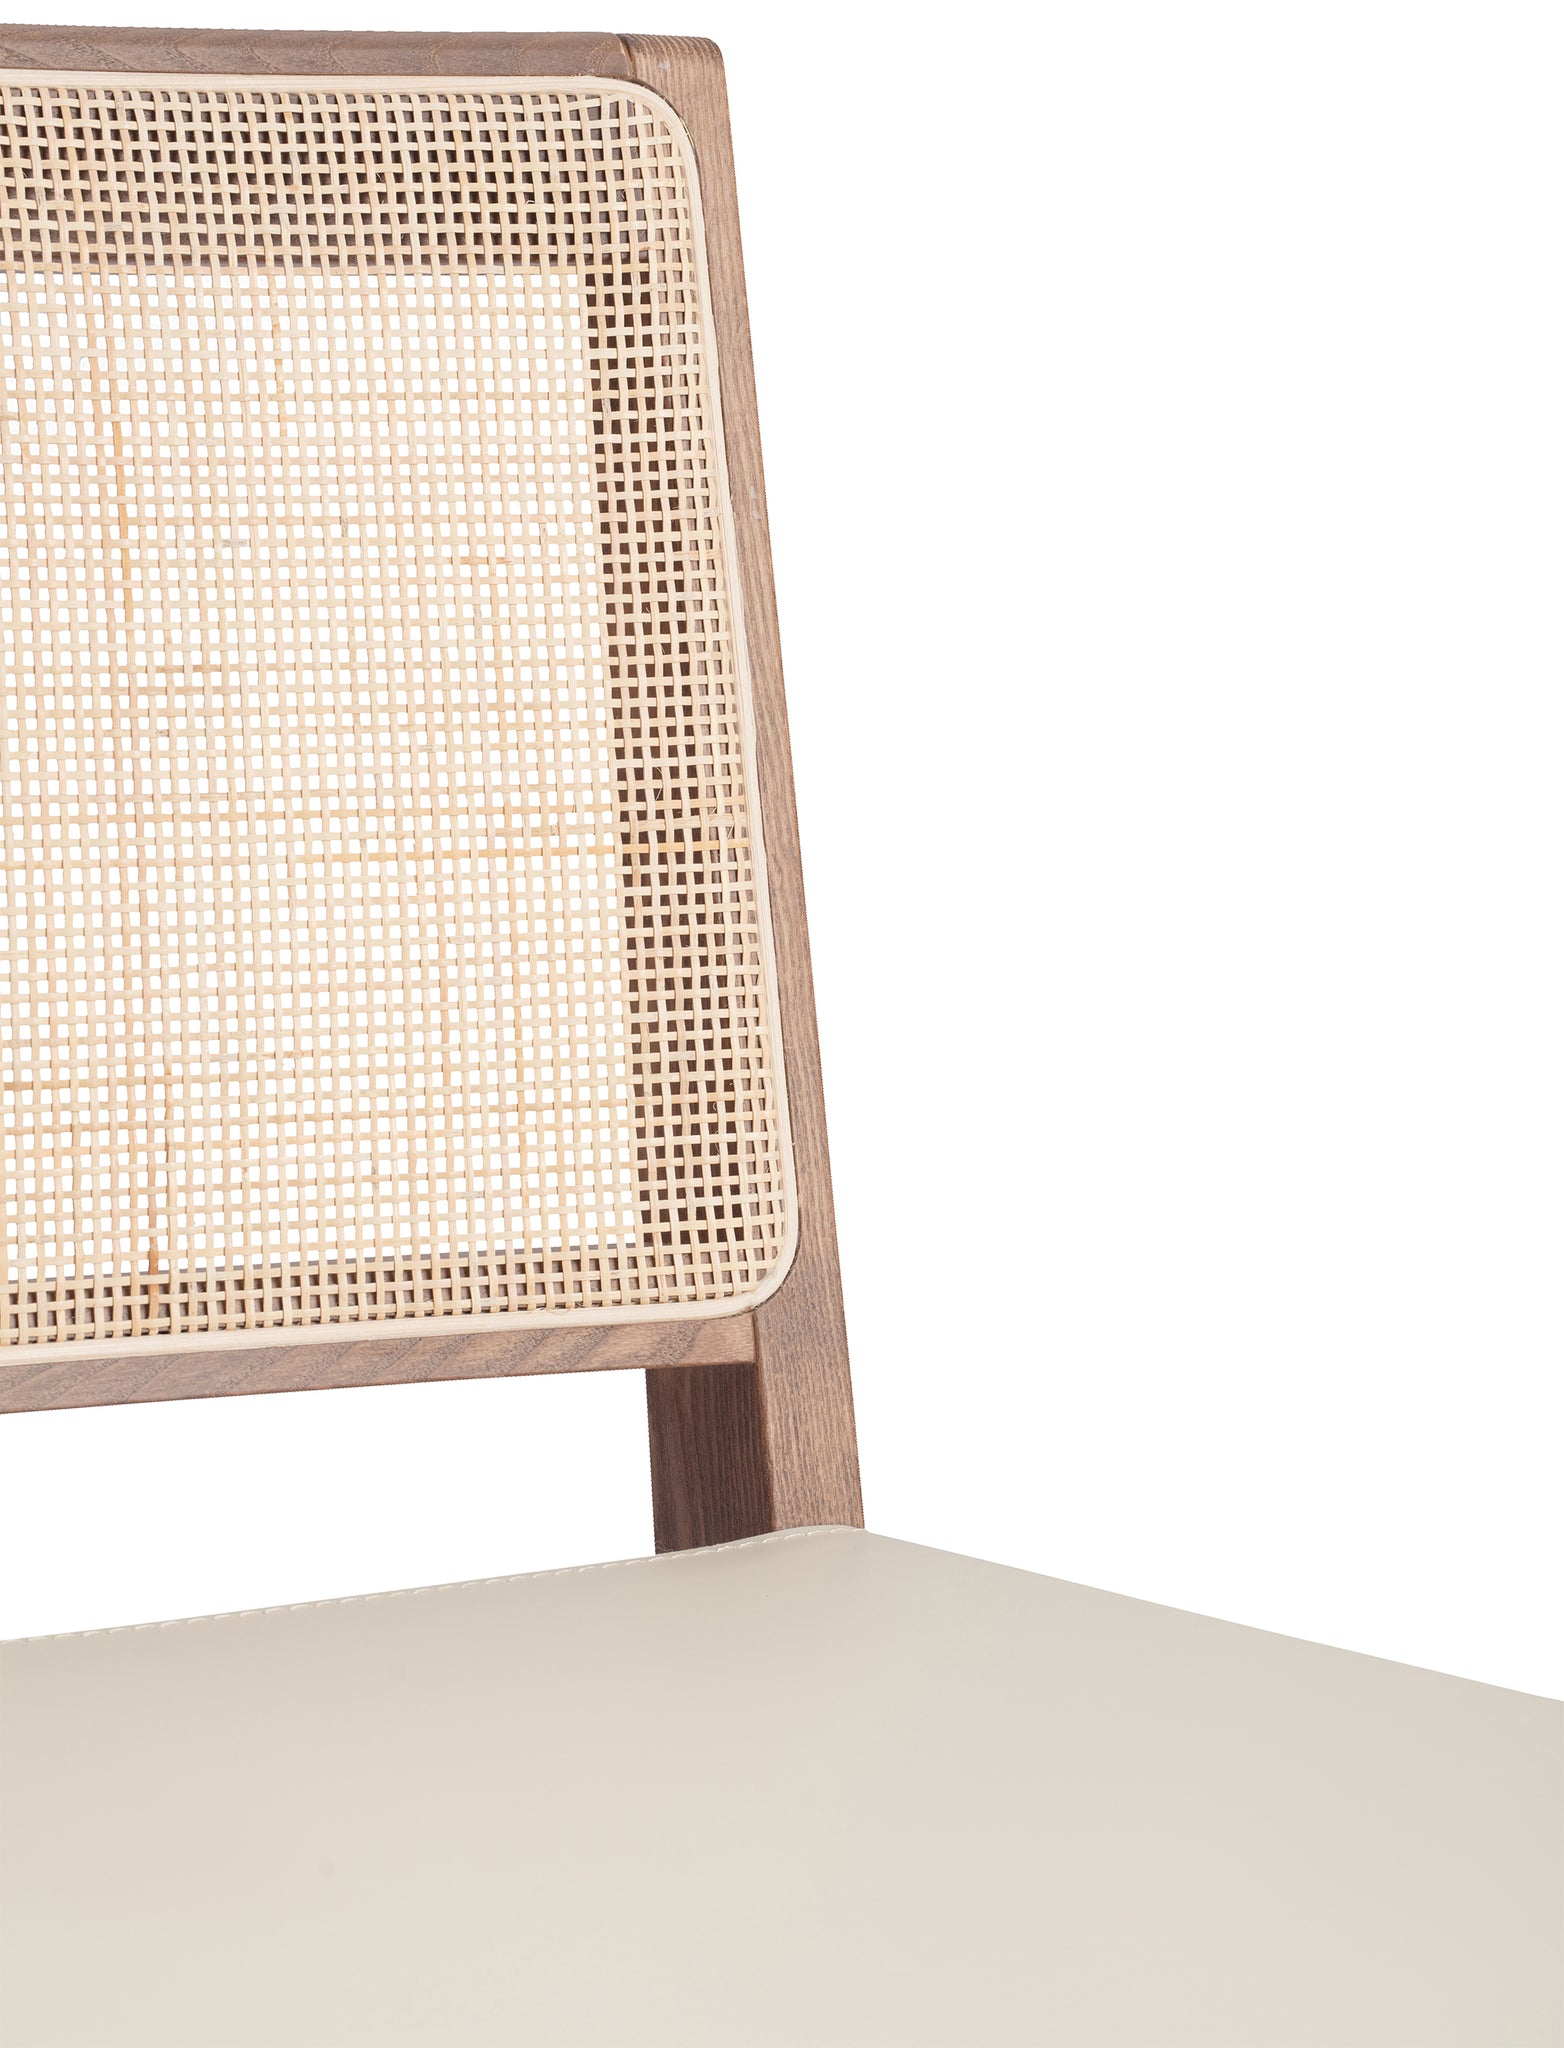 Close-up 2 of an "Elye" modern dining chair, walnut stained ash frame, square weave cane back, contract grade off white leather seat, produced by Klarel in Italy. #K41-1